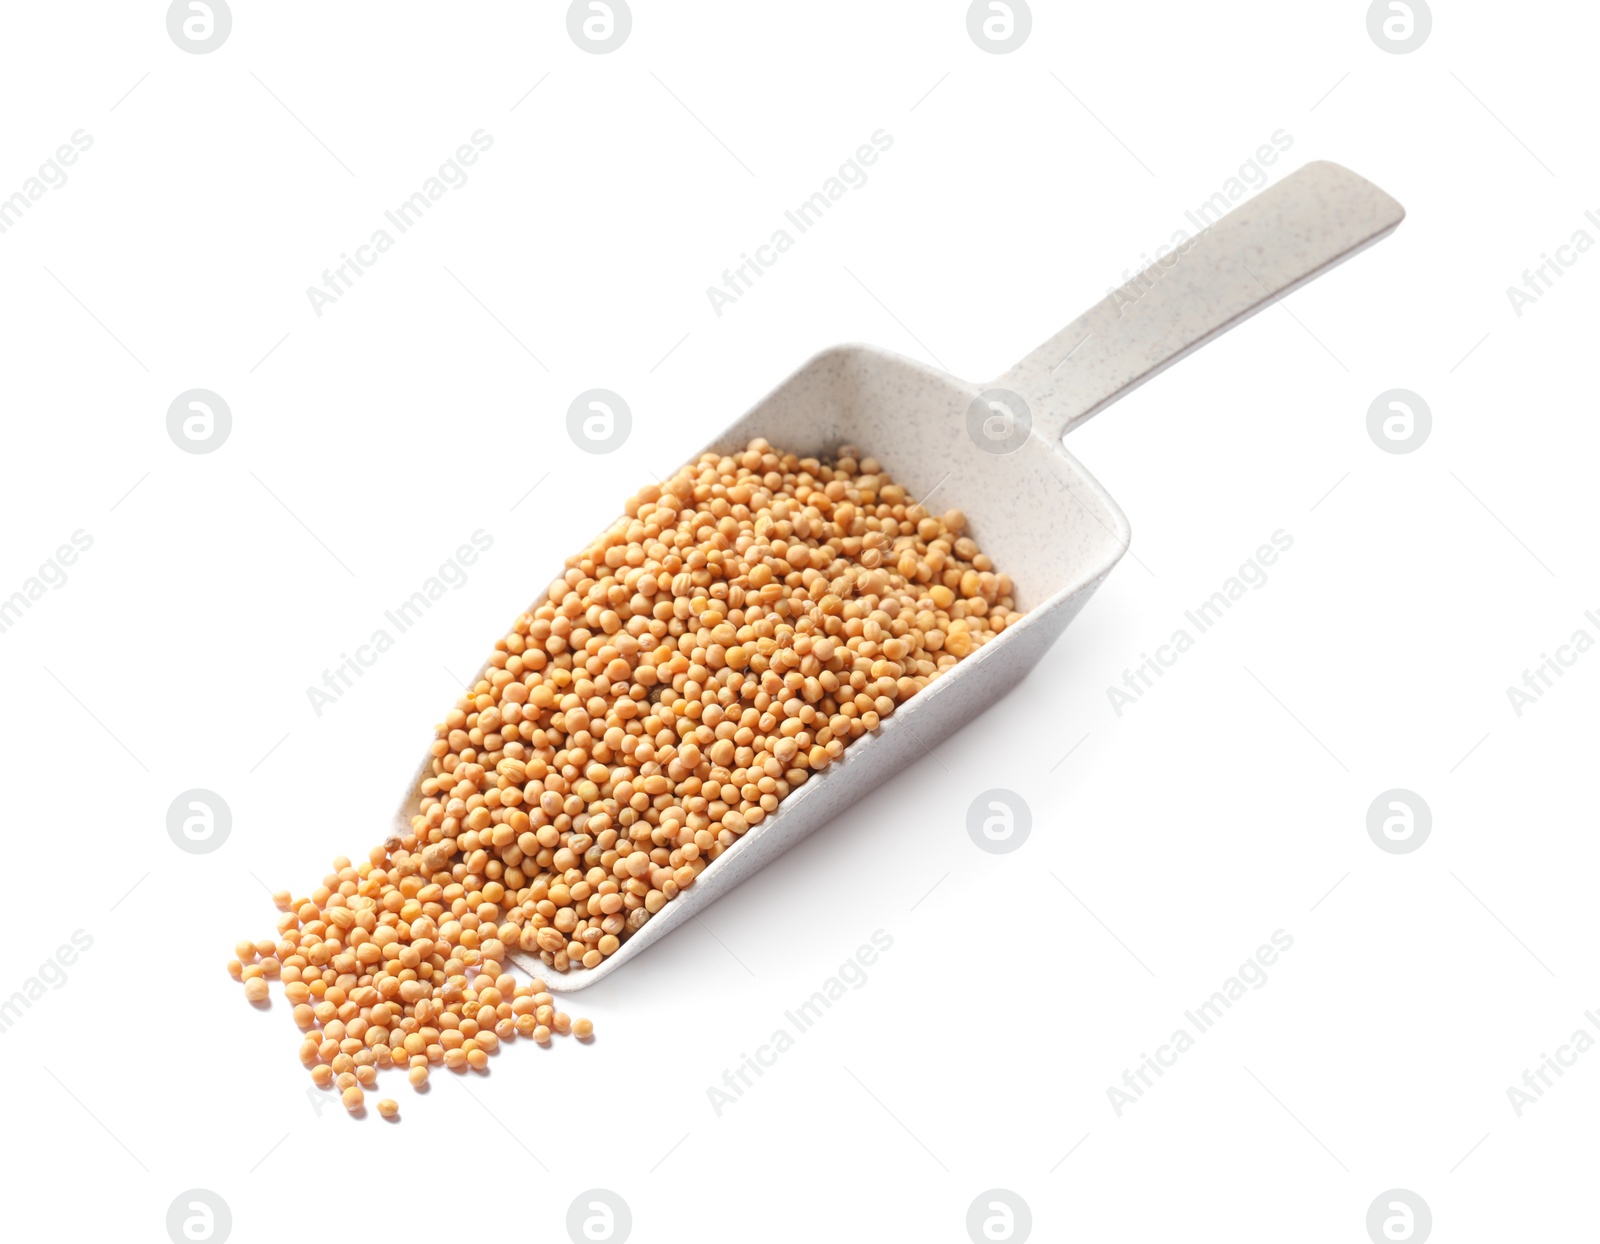 Photo of Scoop with mustard seeds on white background